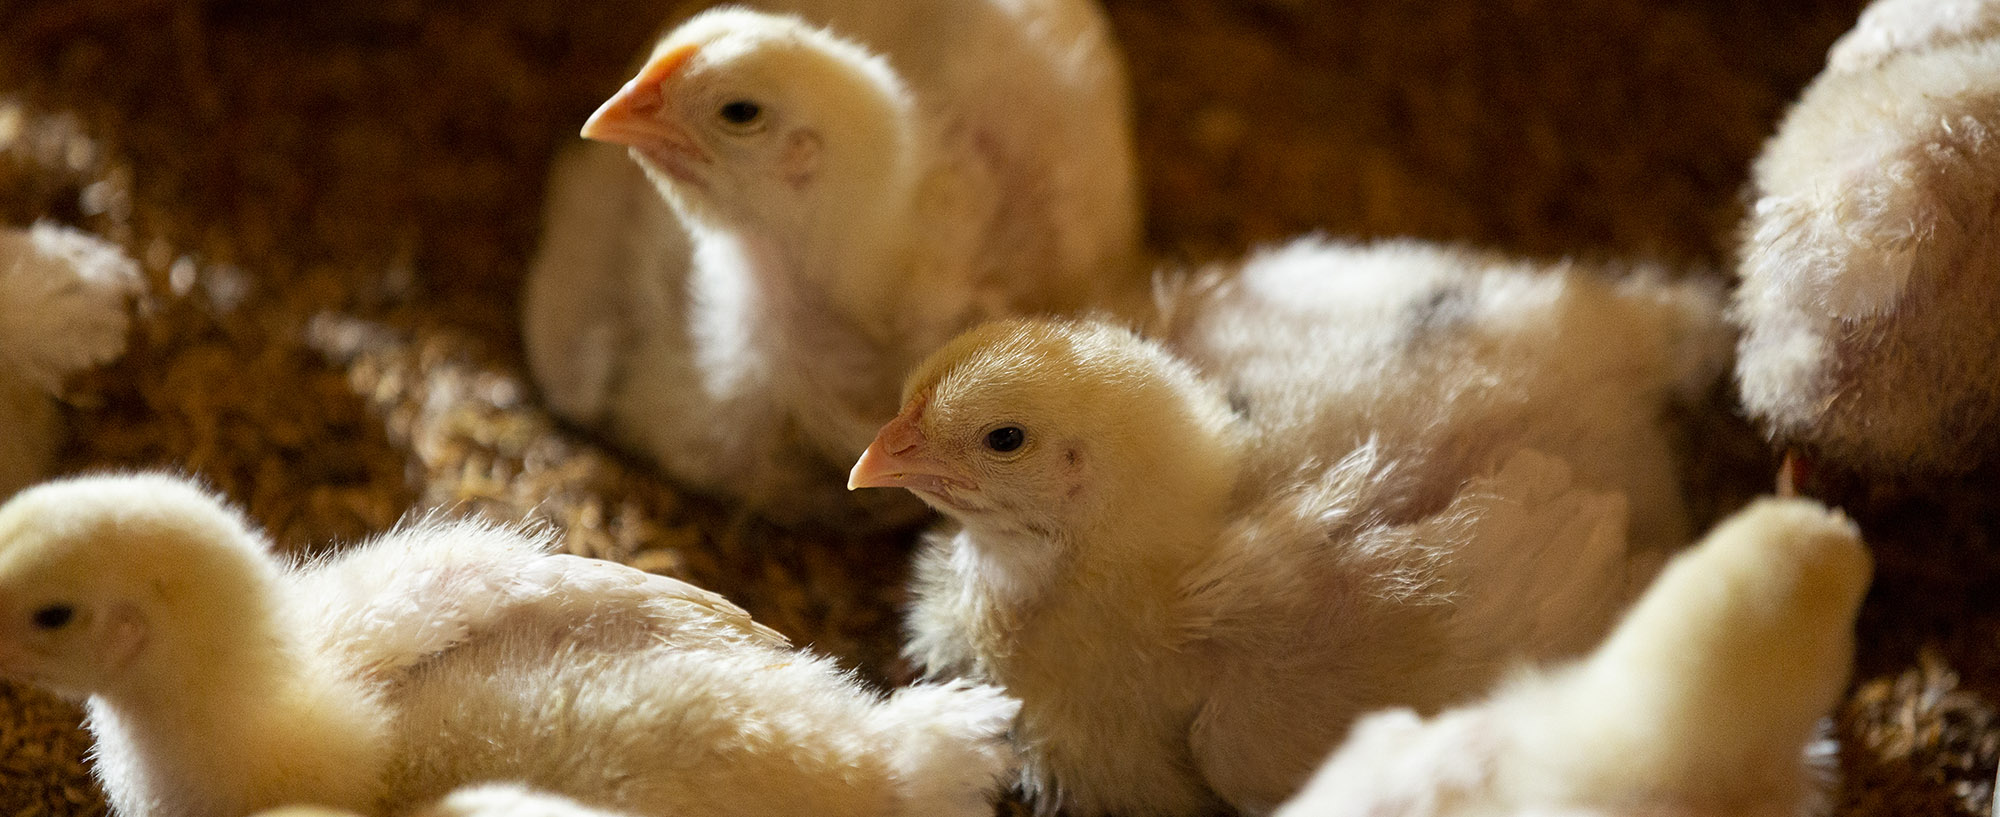 How to Start a Chicken Farm in Mississippi and Louisiana